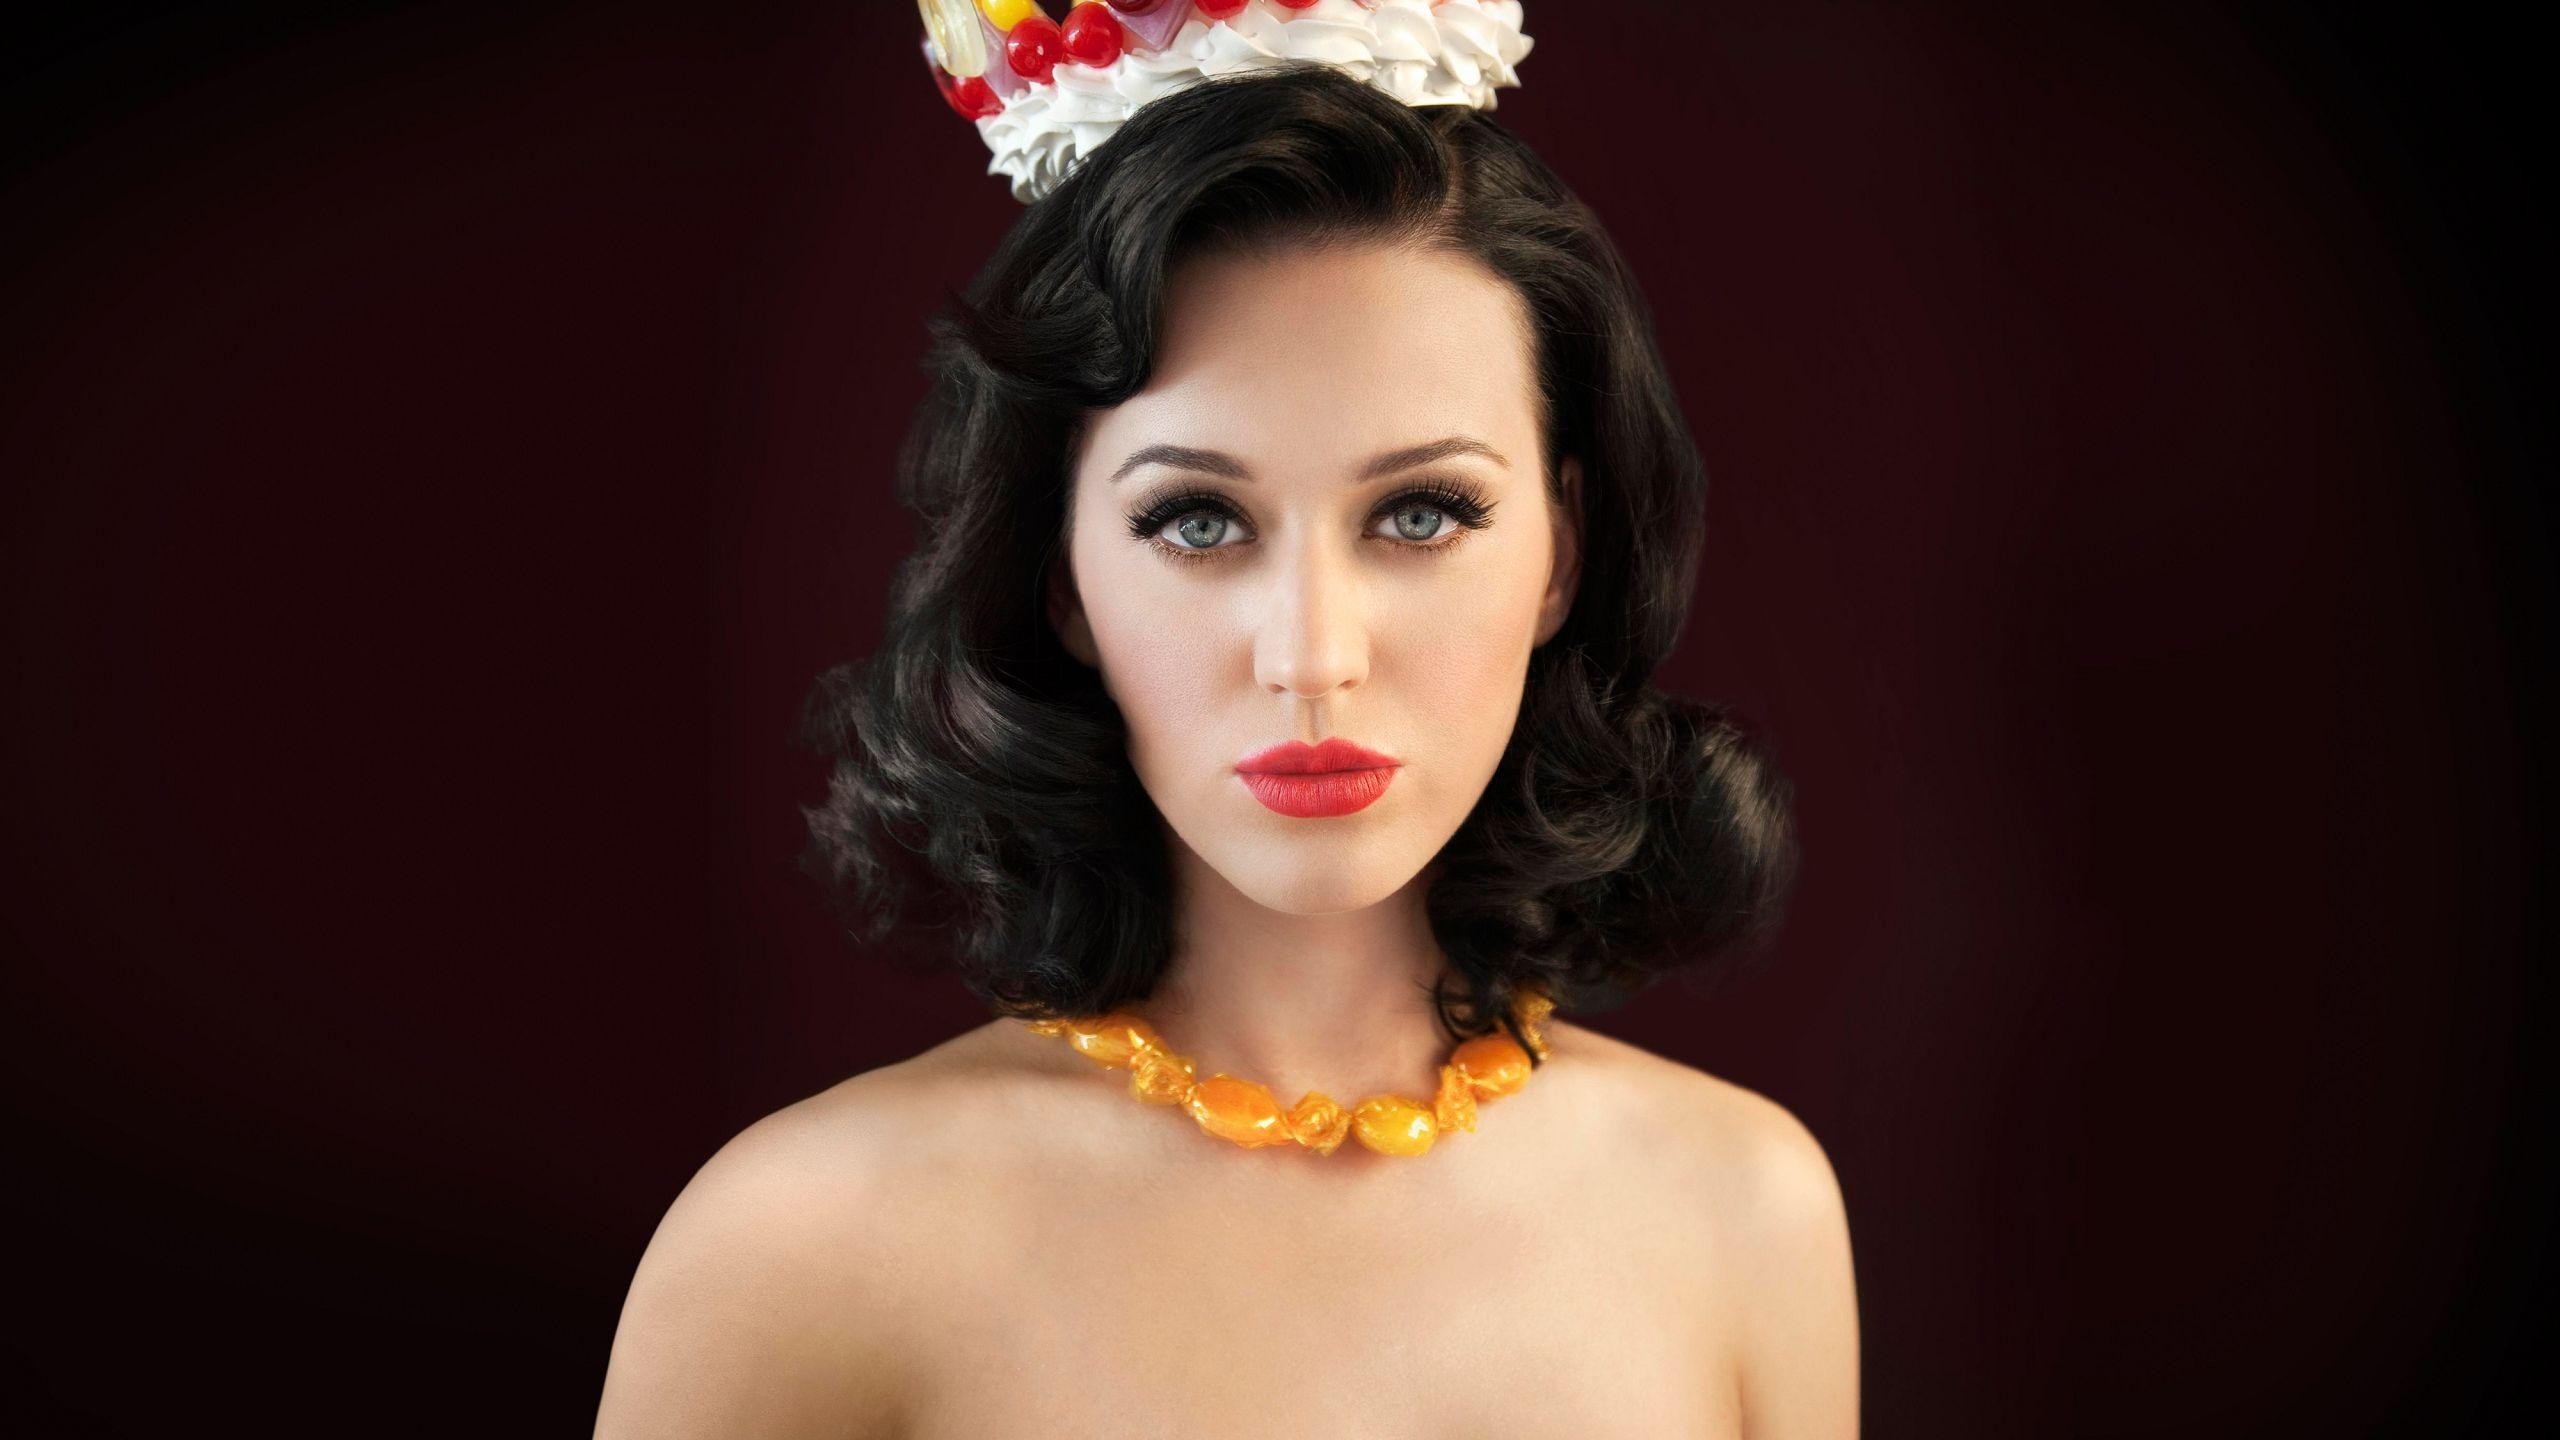 Katy Perry Full Makeup Wallpapers